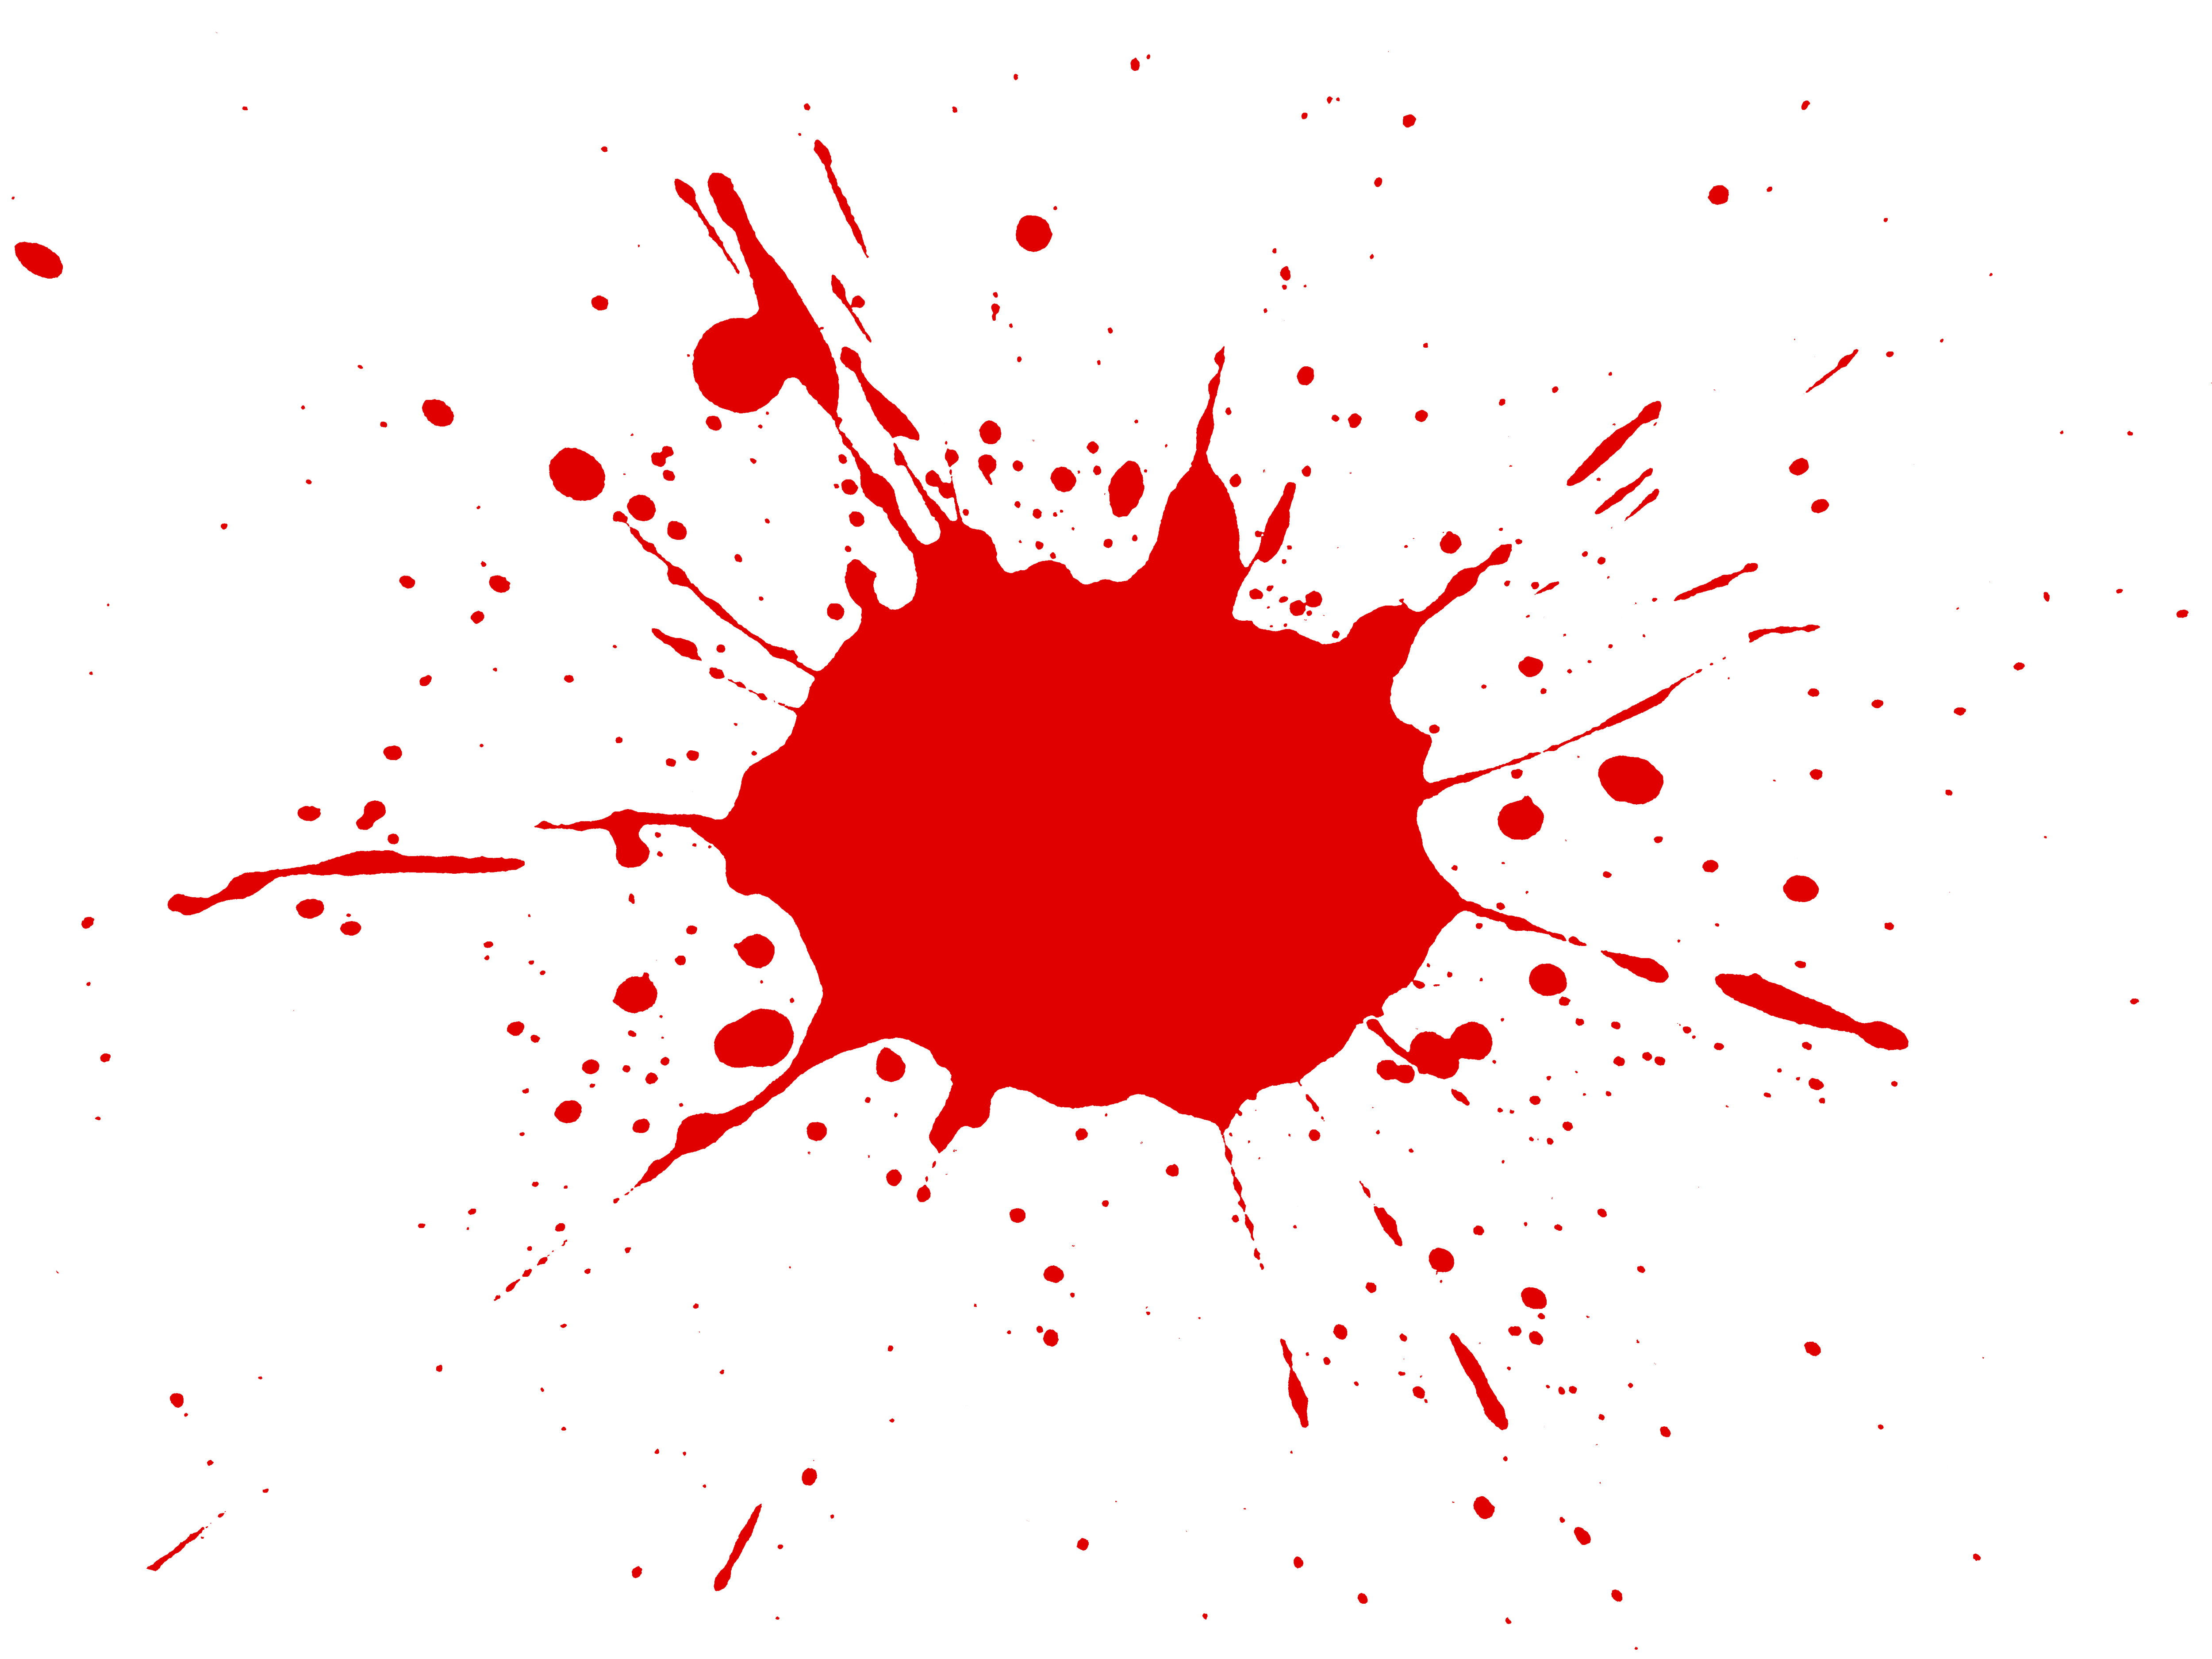 Splatter Paint Background Submited Image